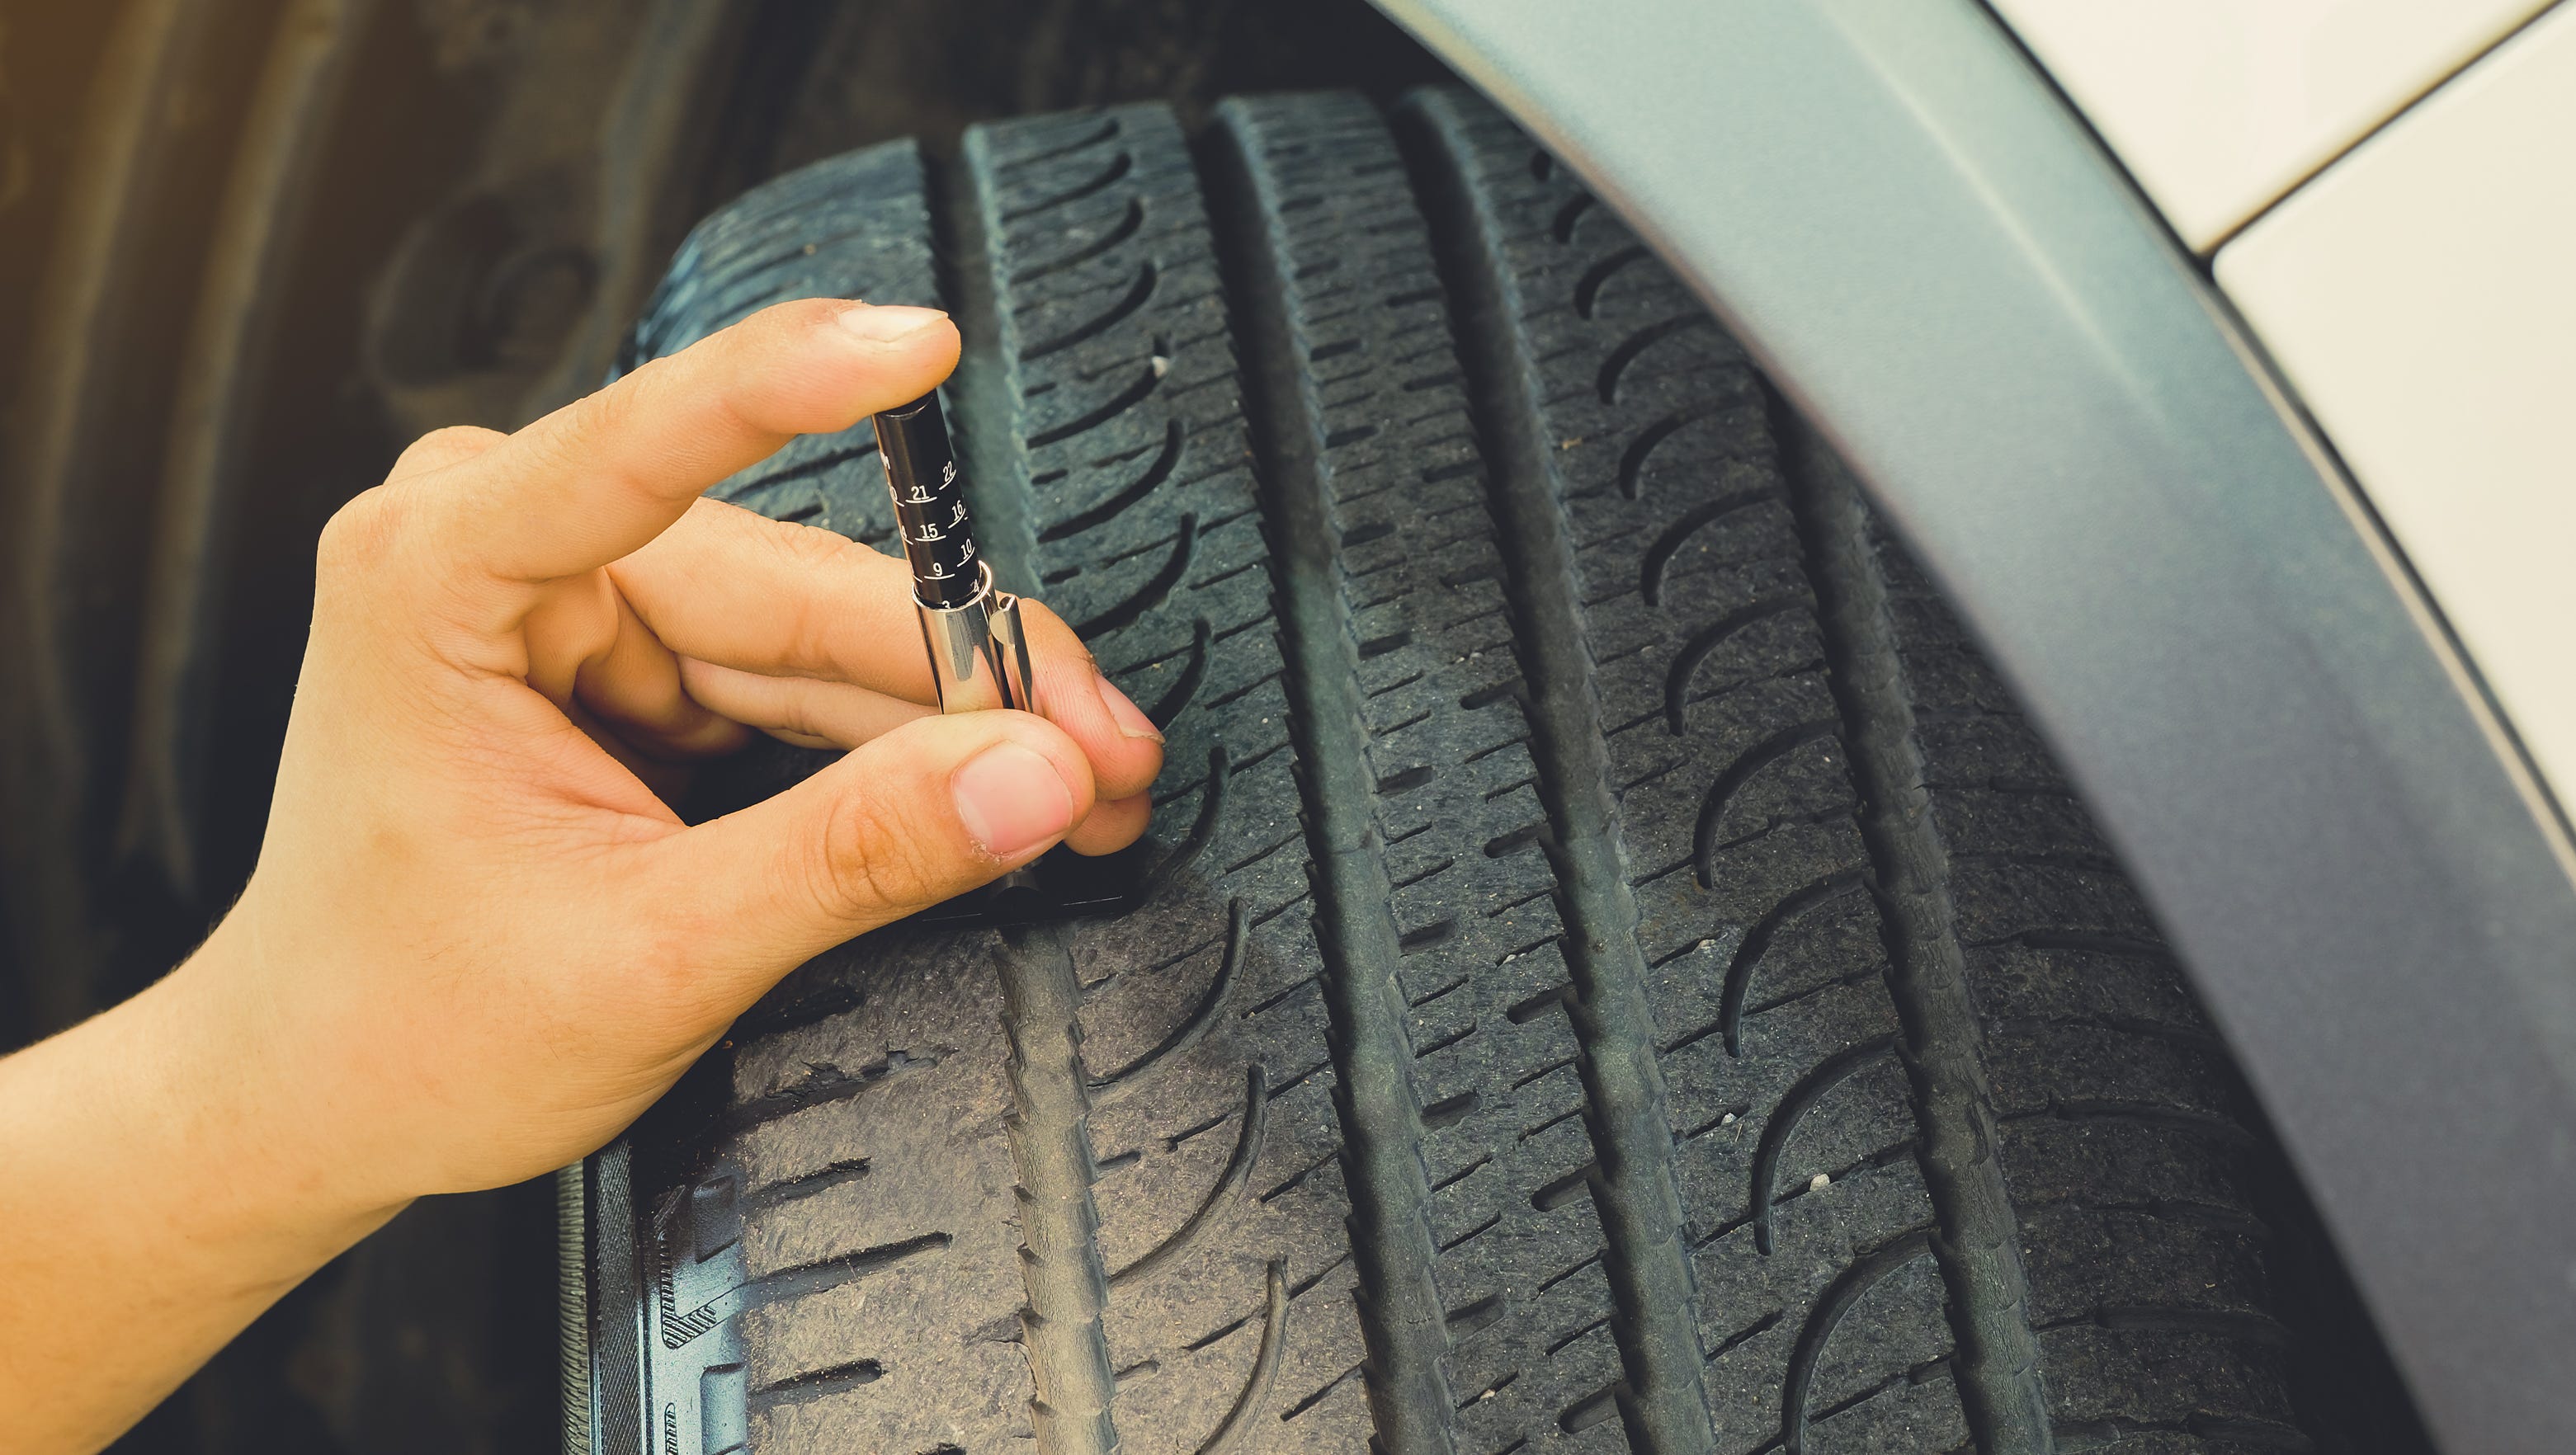 Road trip safety tips: Check your tire pressure and tread depth